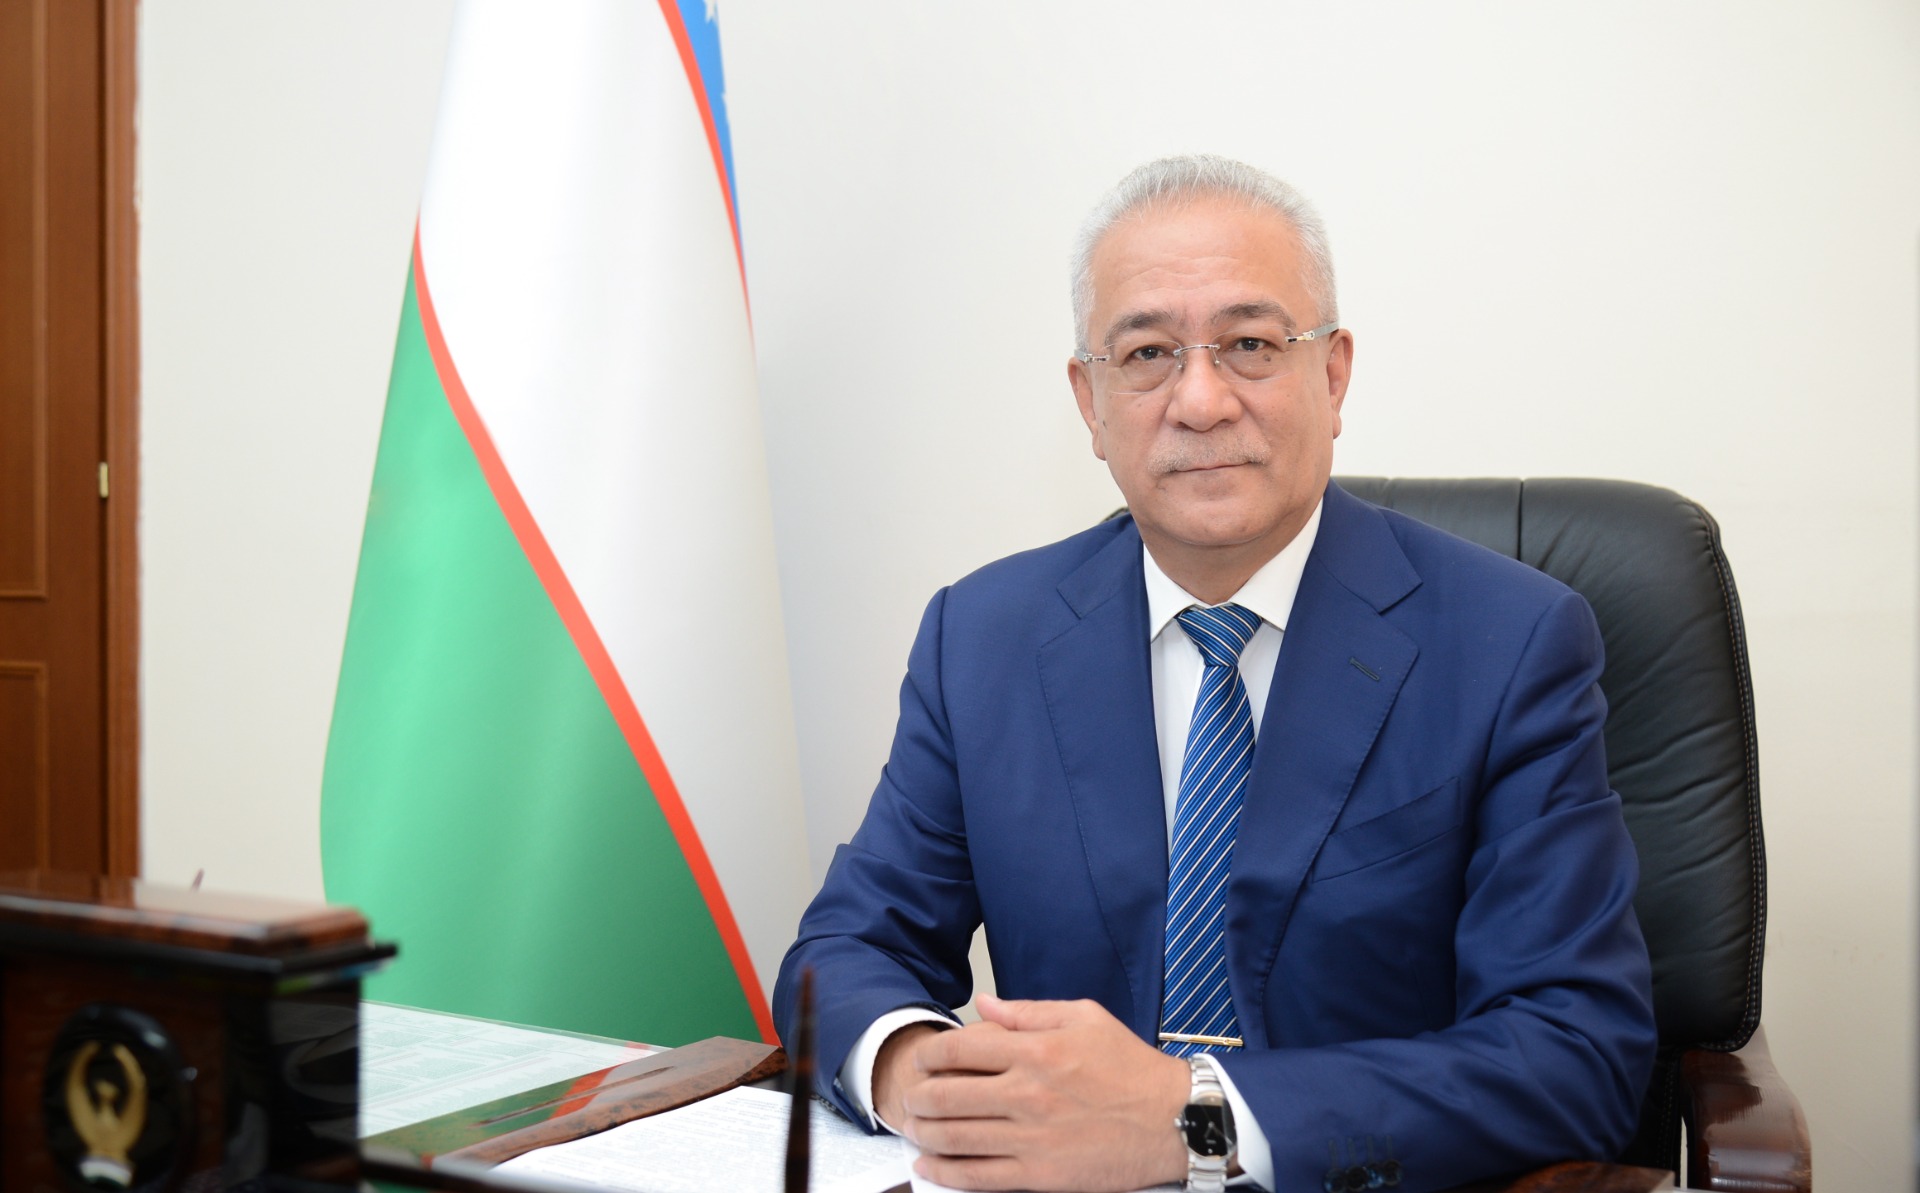 Ismatulla Irgashev, the Special Representative of the President of Uzbekistan for Afghanistan